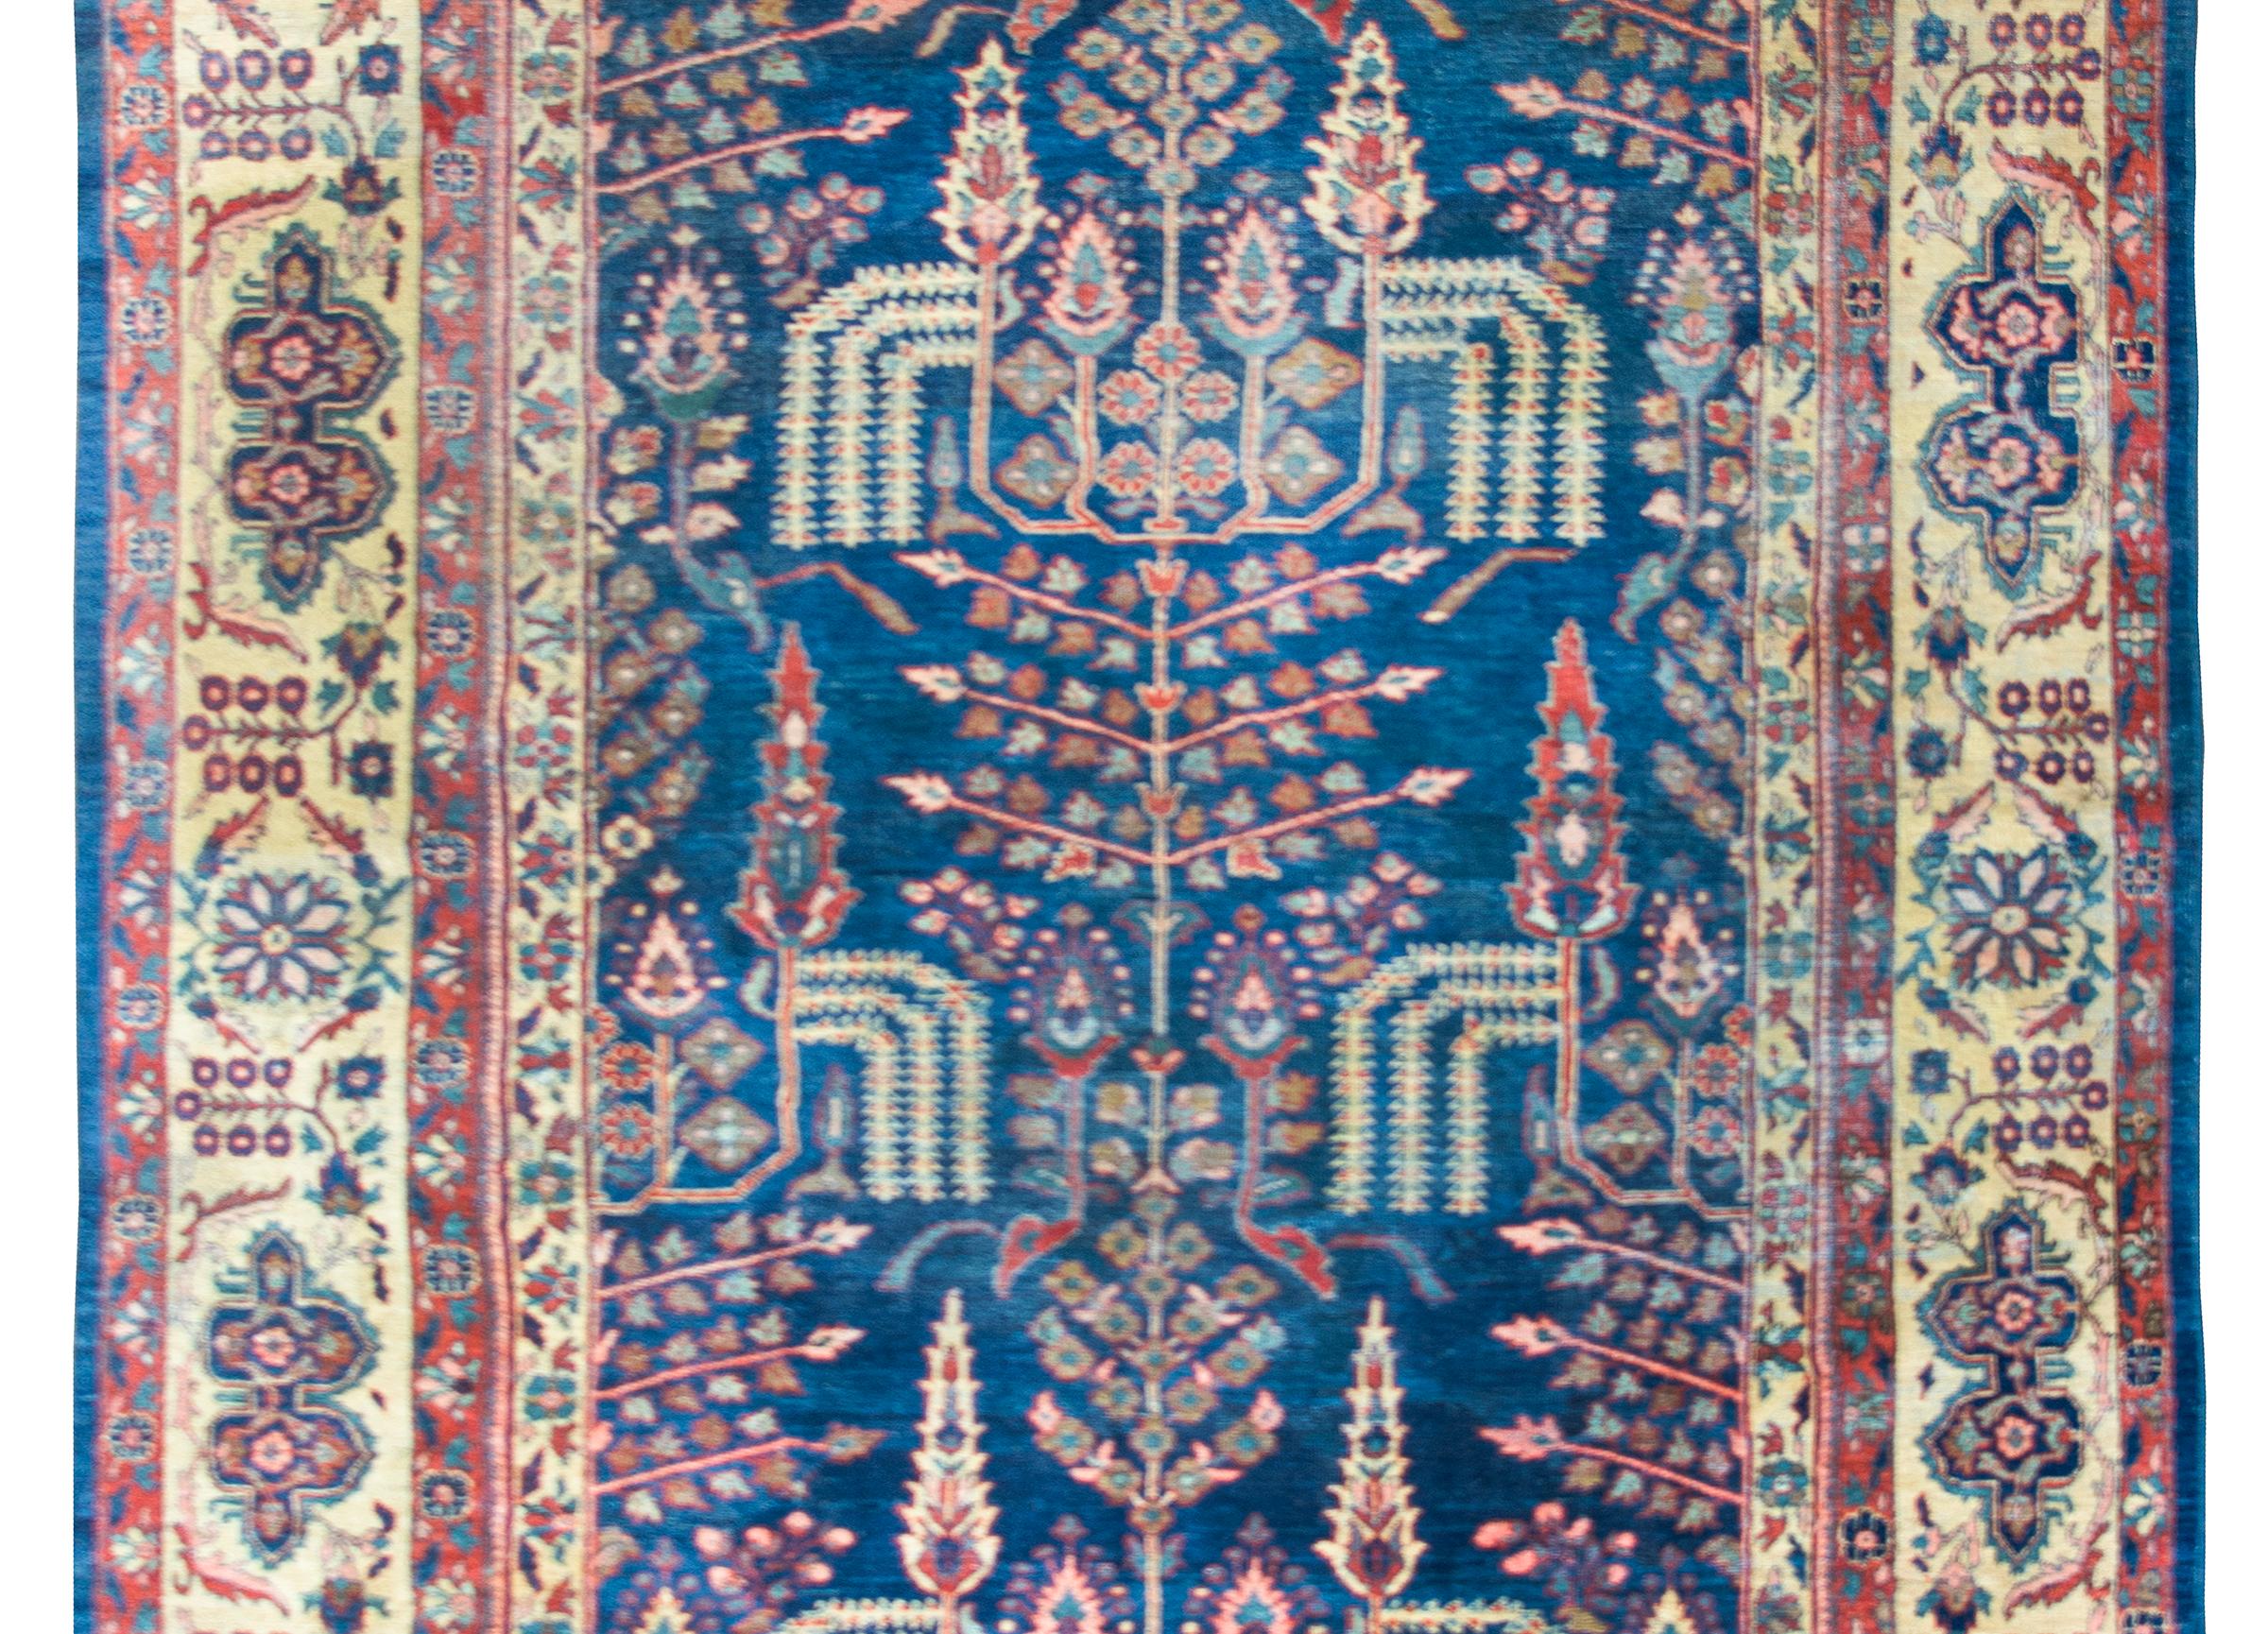 A breathtaking early 20th century Persian Sultanabad rug with a tree-of-life pattern containing a large central tree flanked by cascading willow branches, cypress trees, and myriad other floral forms.  The border is one of the best we've seen in a